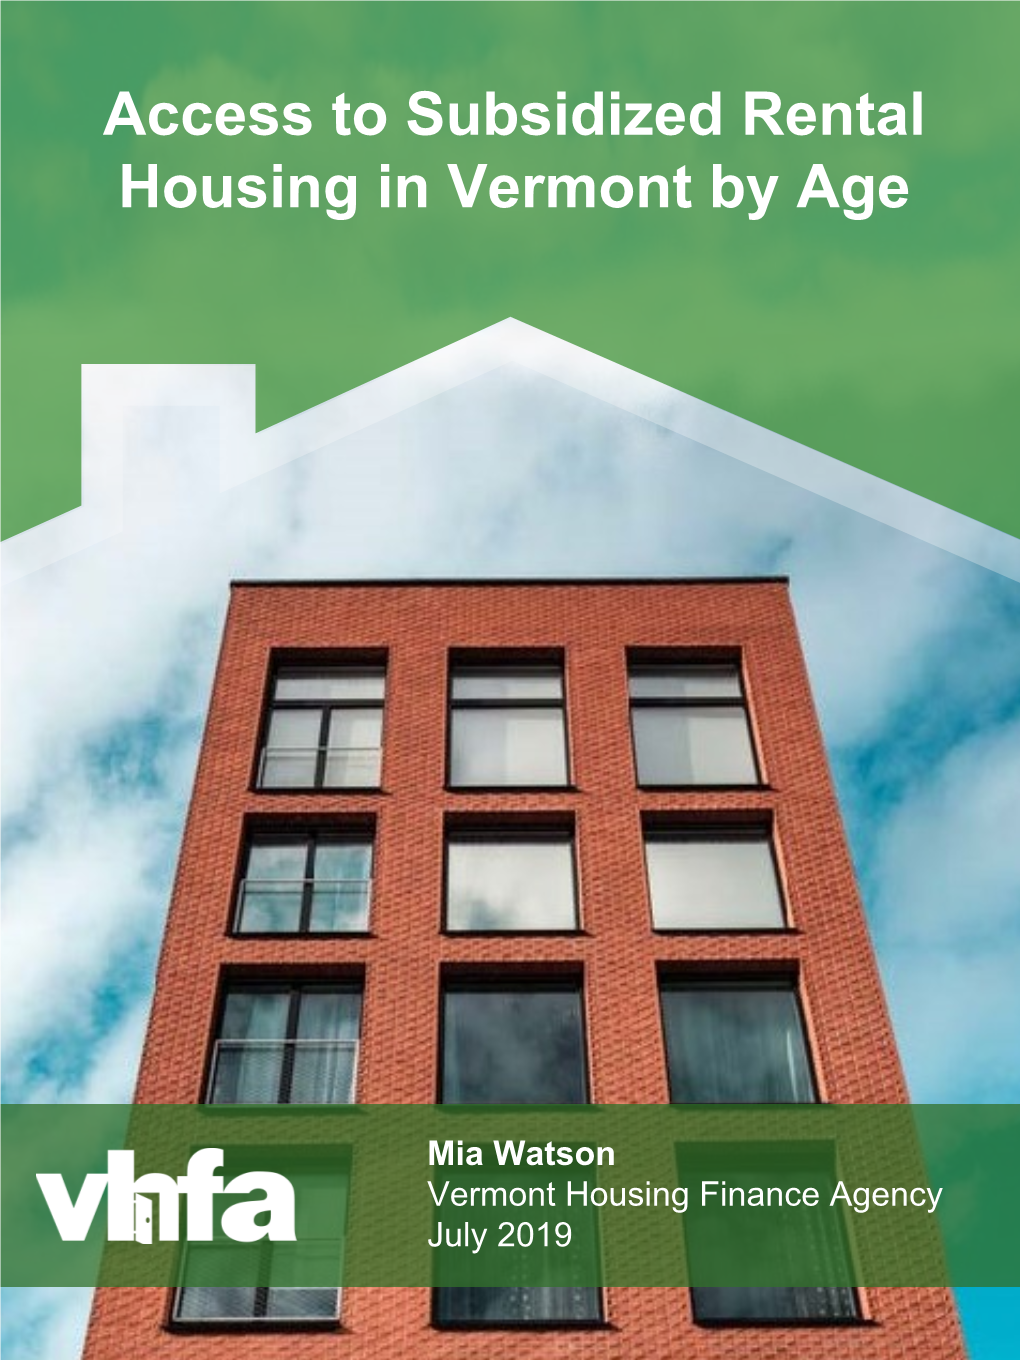 Access to Subsidized Rental Housing in Vermont by Age